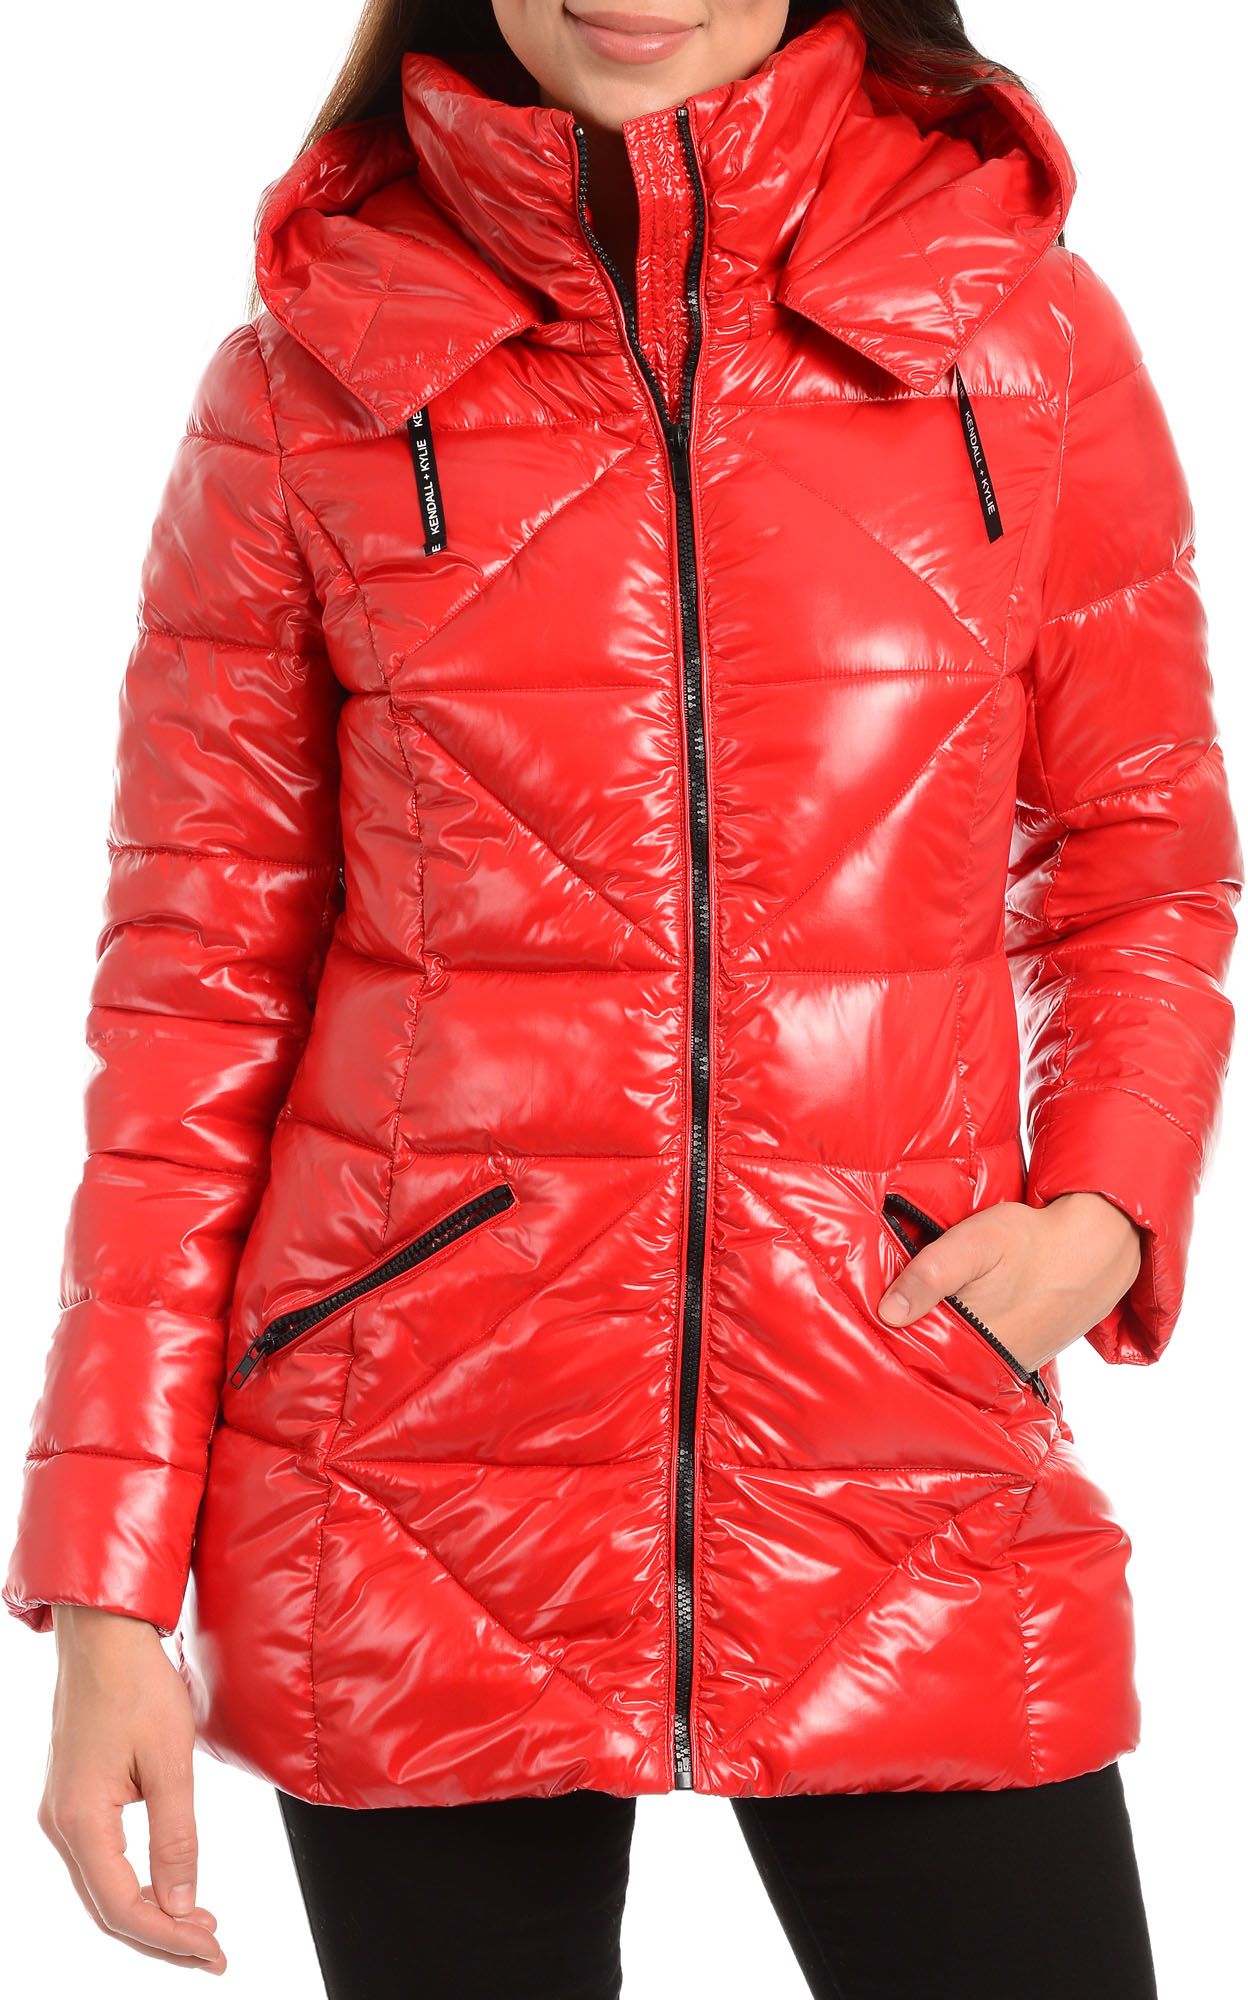 Insulated Jackets Best Price Guarantee At Dick S